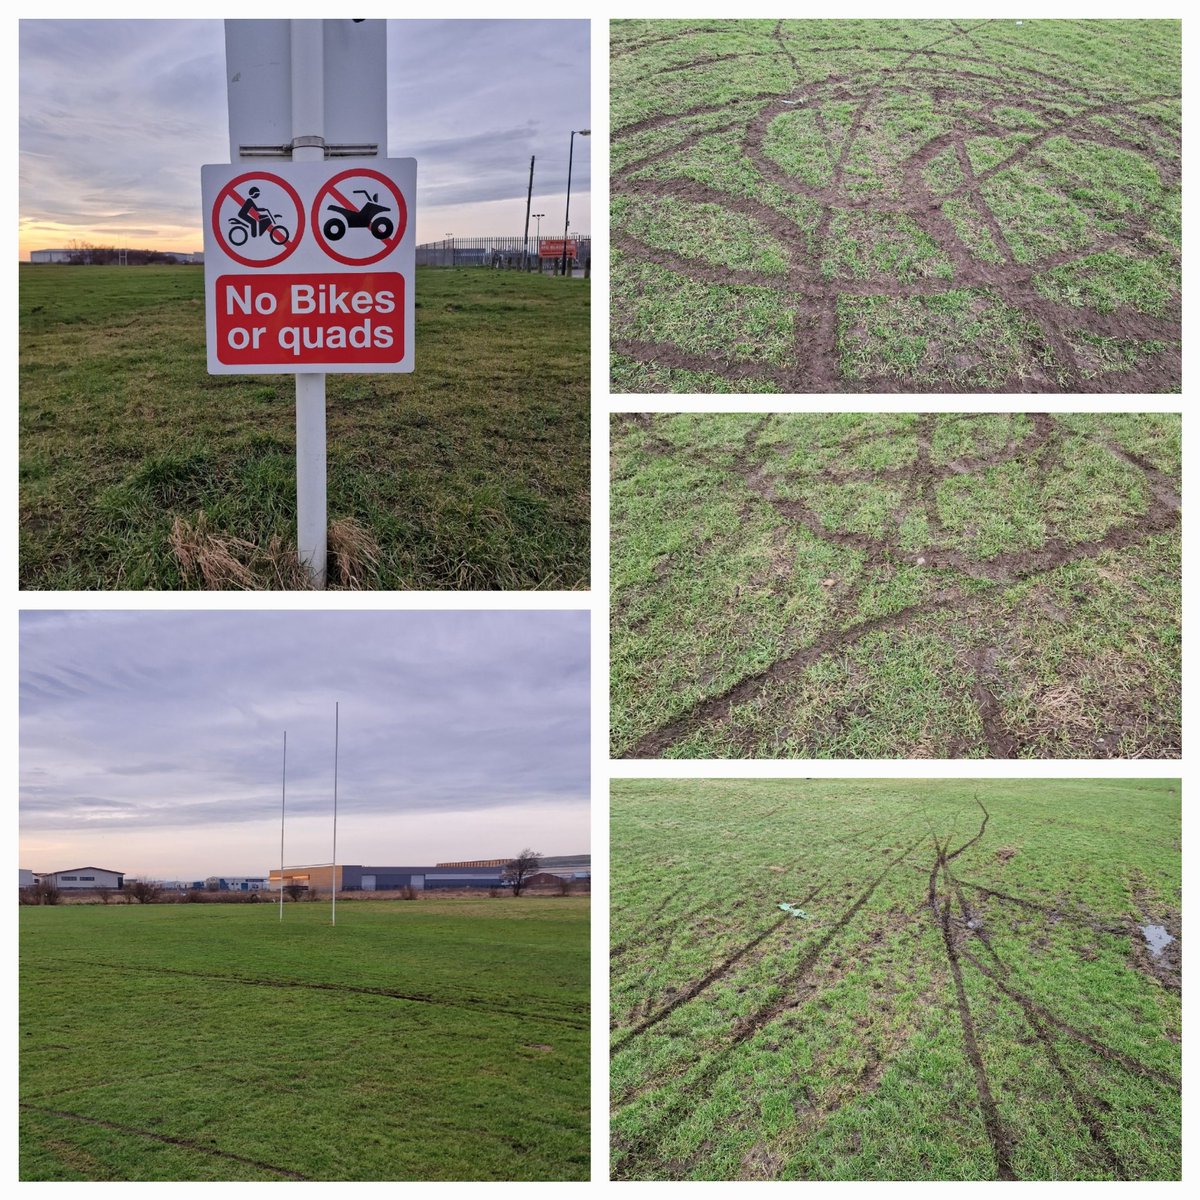 Thanks to a selfish few on motorcross bikes & quad bikes. This is now how the rugby pitch at Jepson Way playing field is looking.
Please feel FREE to share this post in an attempt to reach the correct target audience. 

#NeighbourhoodPolicingWeek
#WeekOfAction